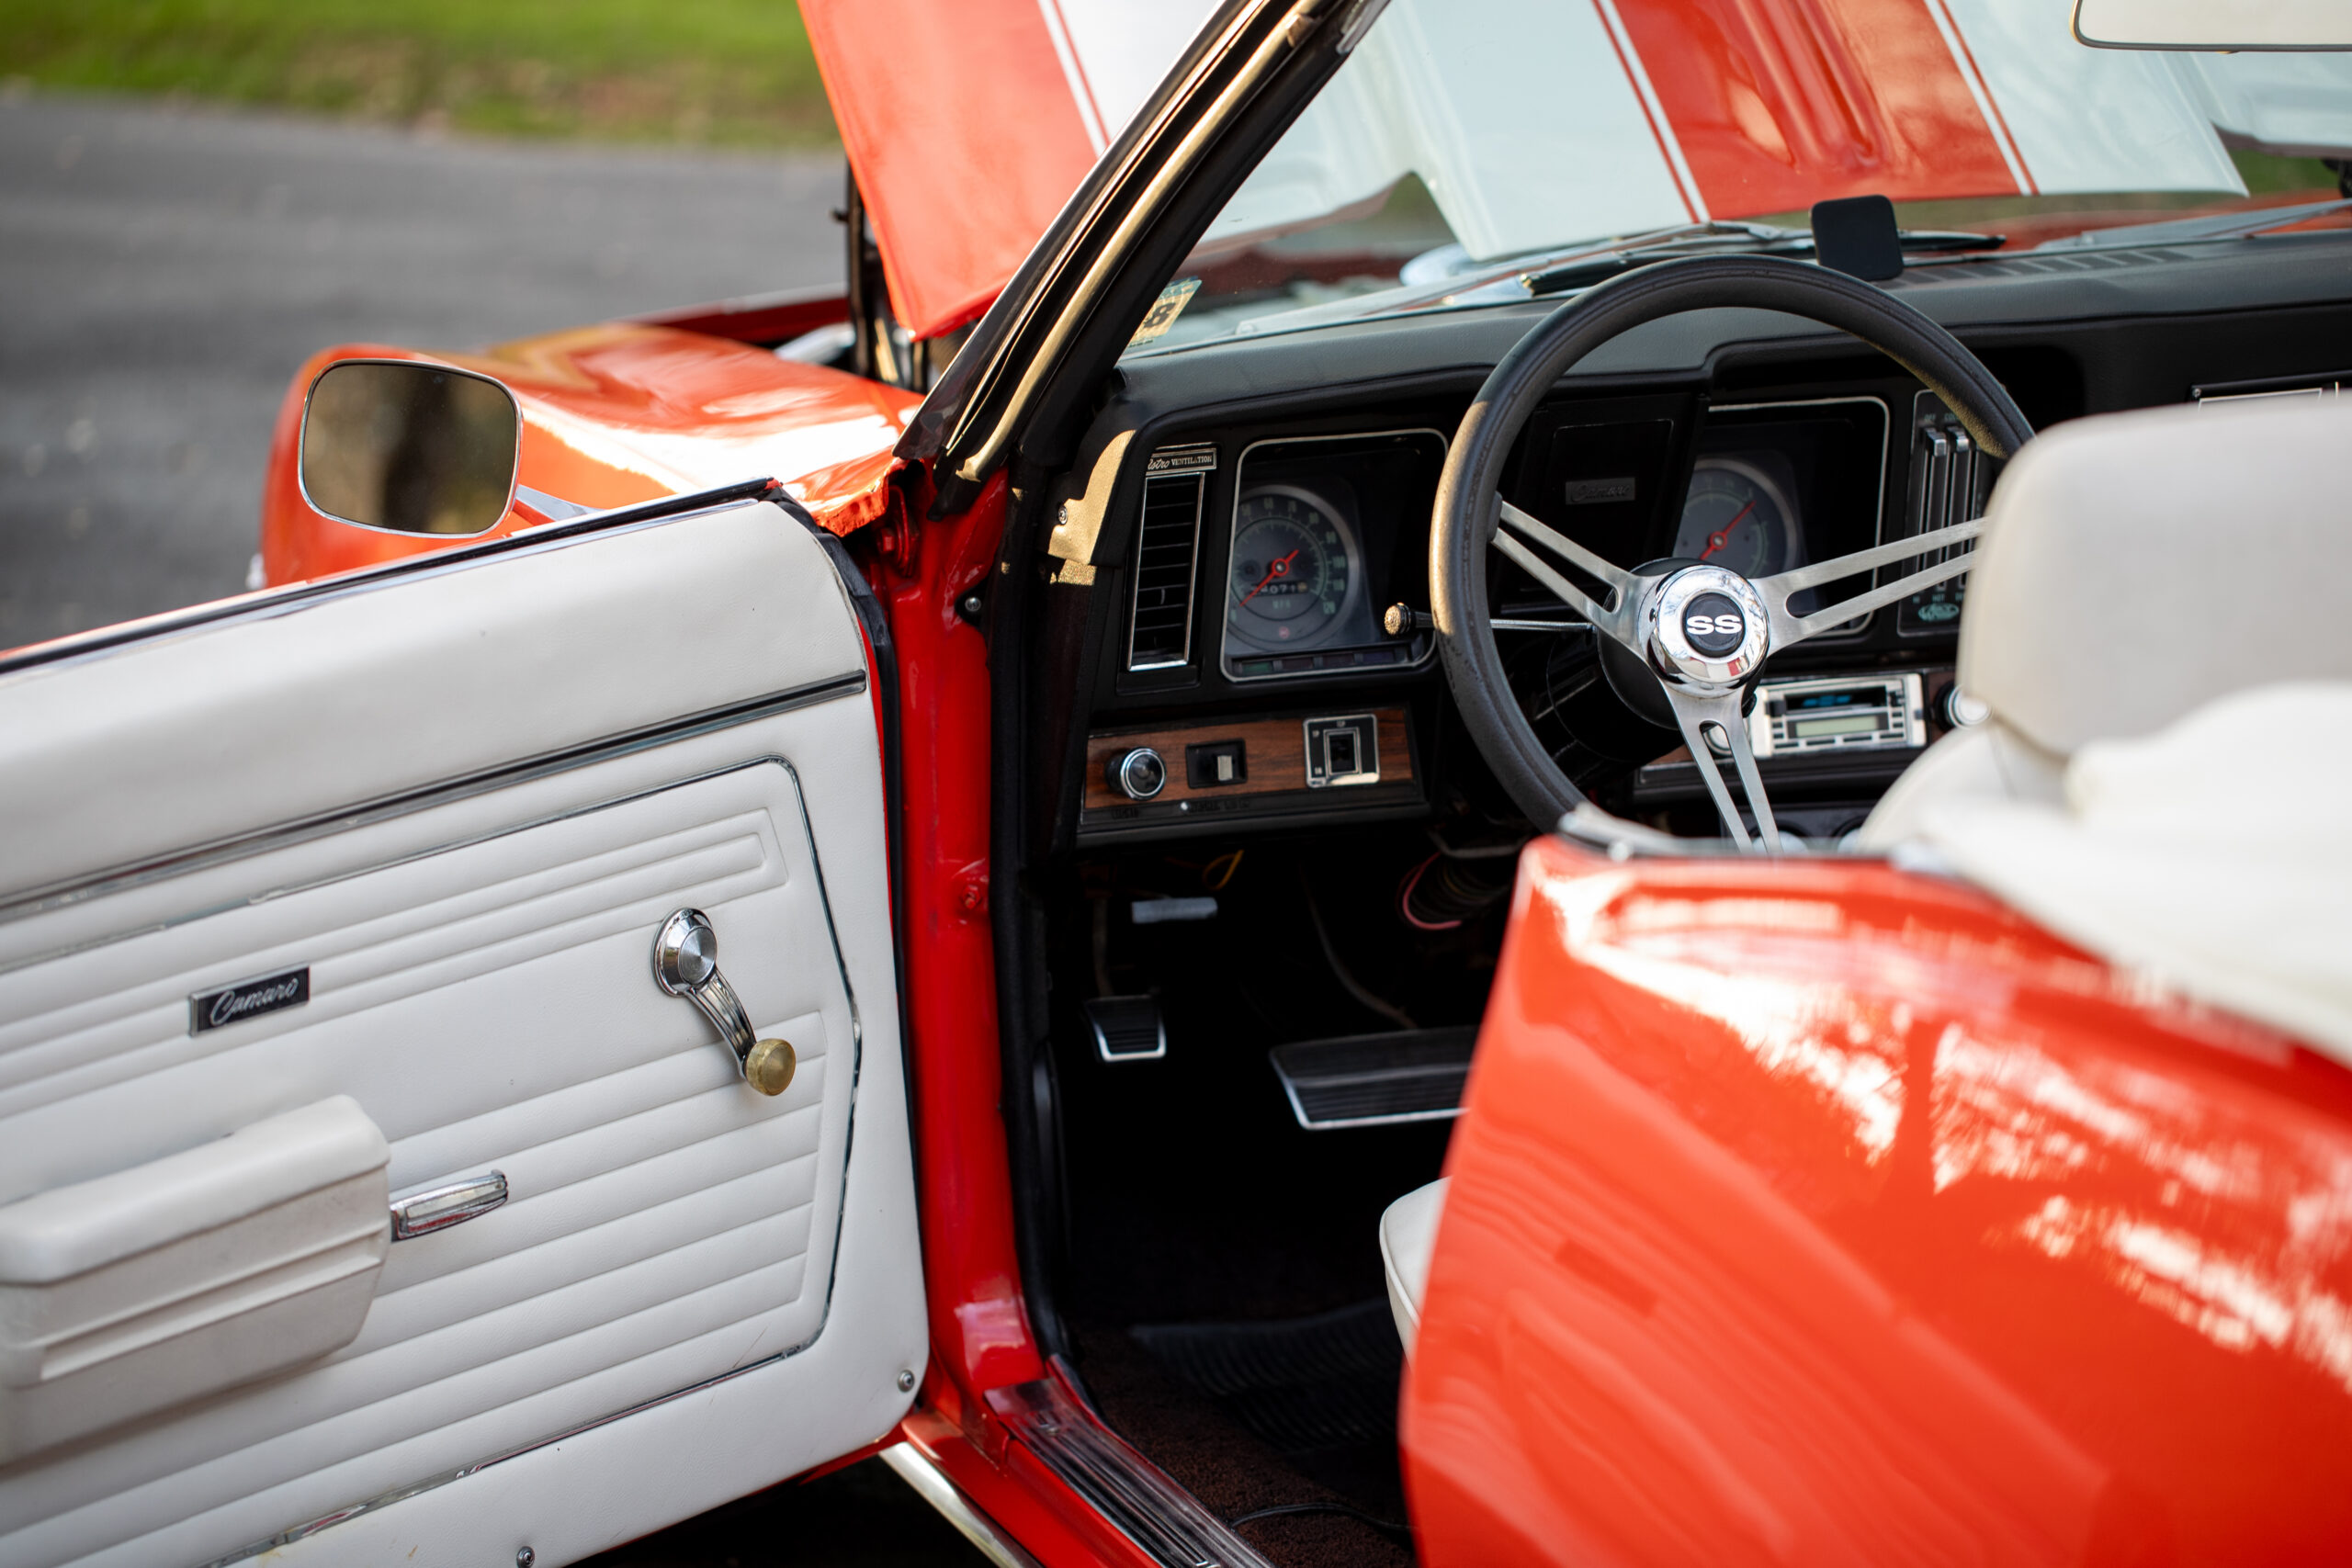 Interior of an orange classic convertible car with the driver's door open, showing white leather door panels, steering wheel, and dashboard with gauges.